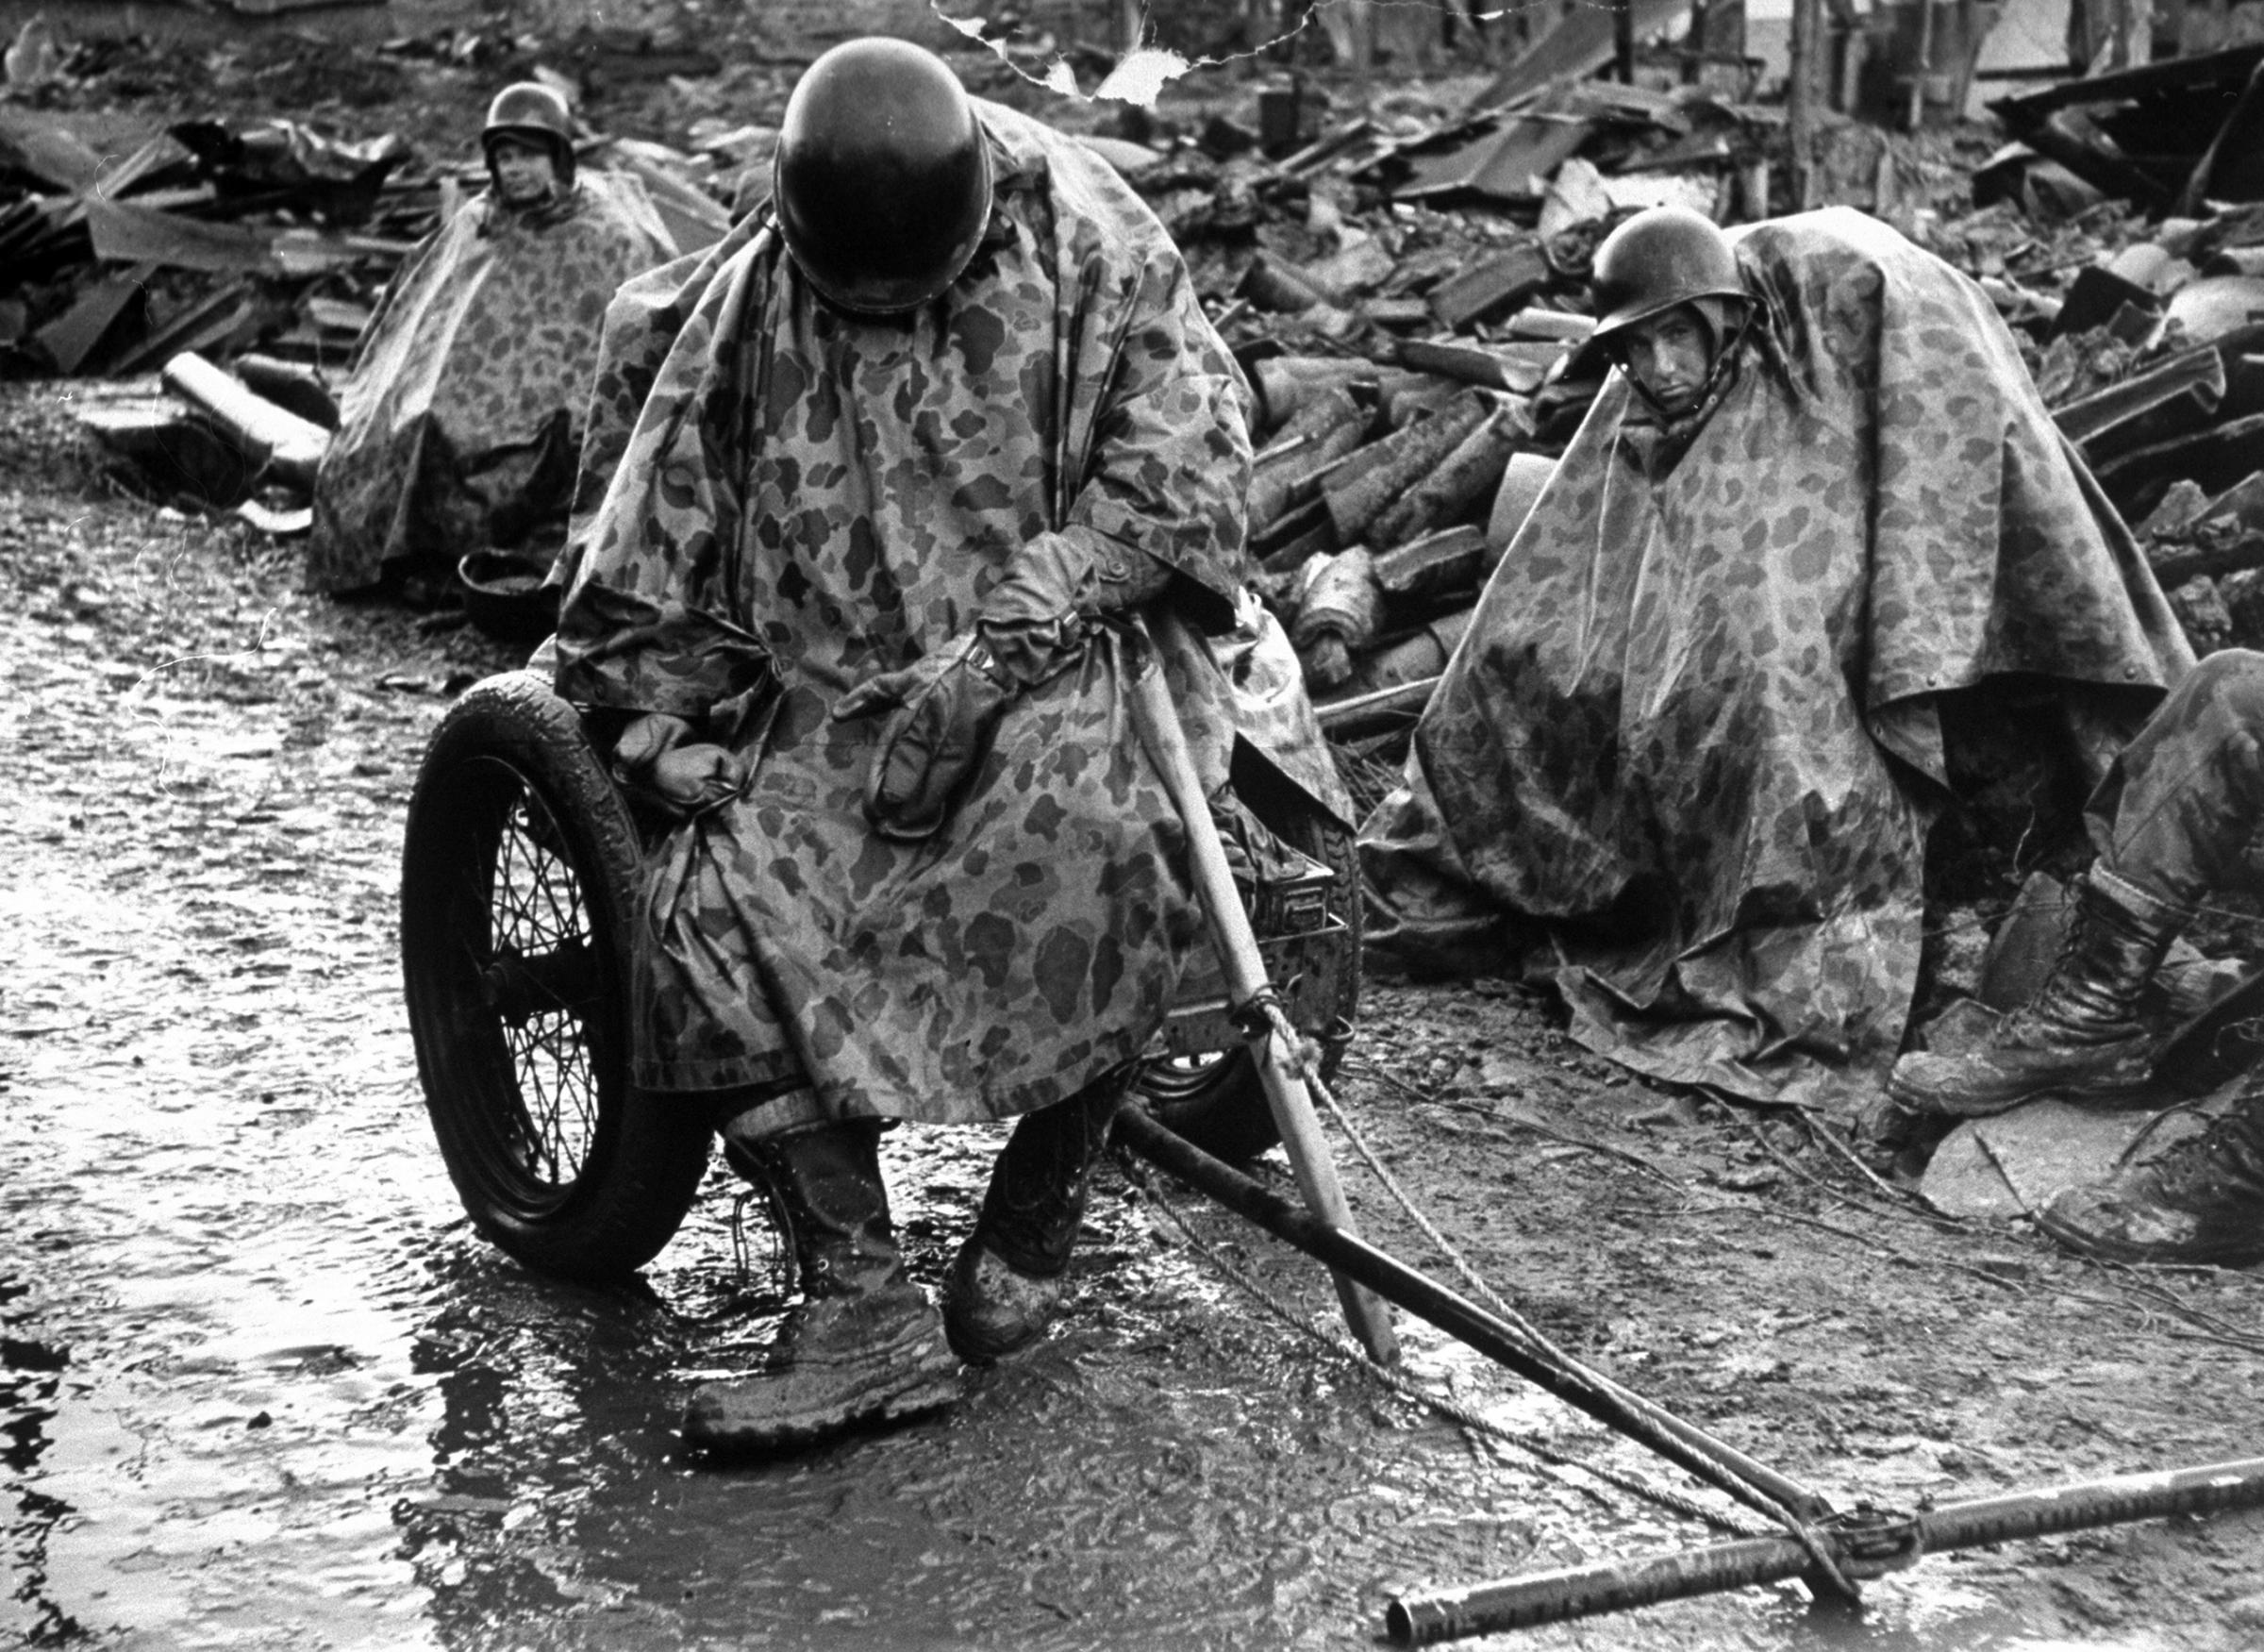 Exhausted Marine catching a nap while sitting on a cart full of ammunition. This image appeared in the March 12, 1951 photo essay: Gen. Matt and Gen. Mud—Waterlogged Marines join U.N.'s Operation Killer.